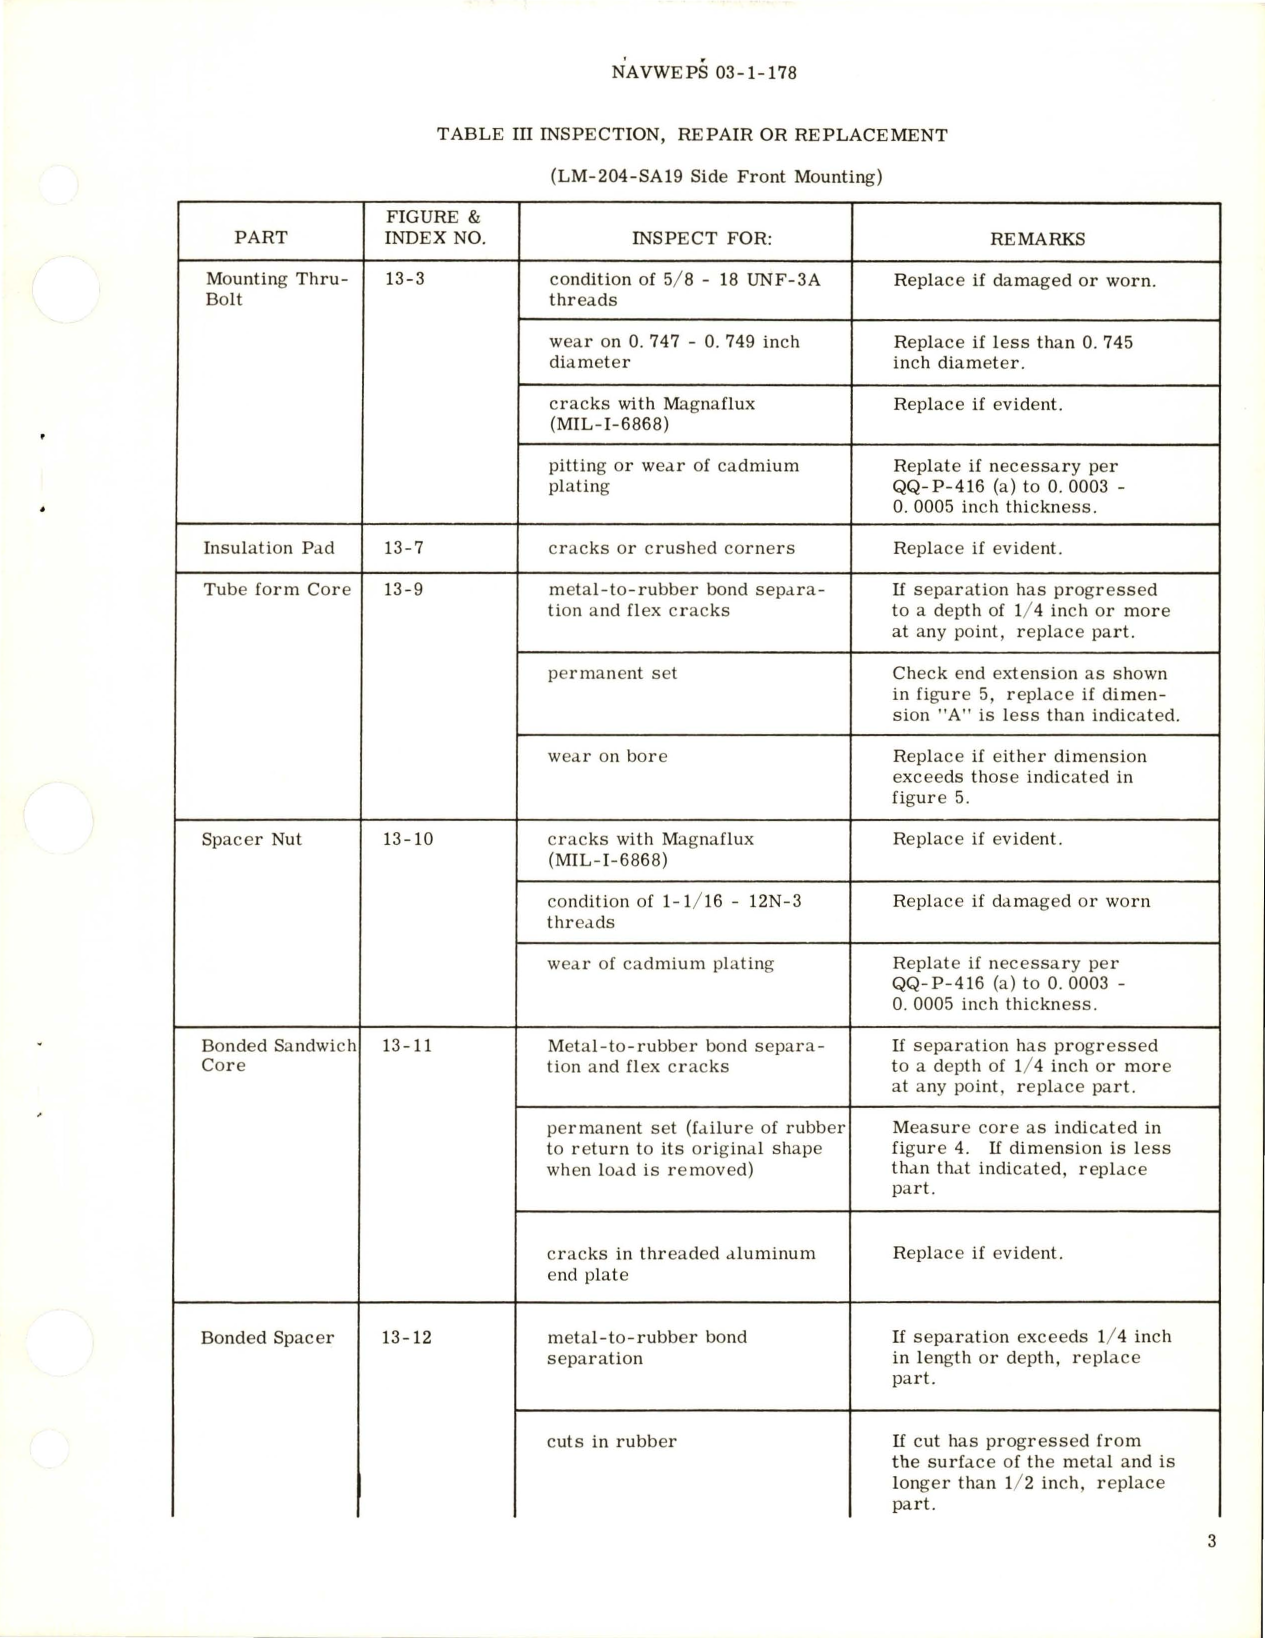 Sample page 5 from AirCorps Library document: Overhaul Instructions with Illustrated Parts Breakdown for Dynafocal Engine Mountings 